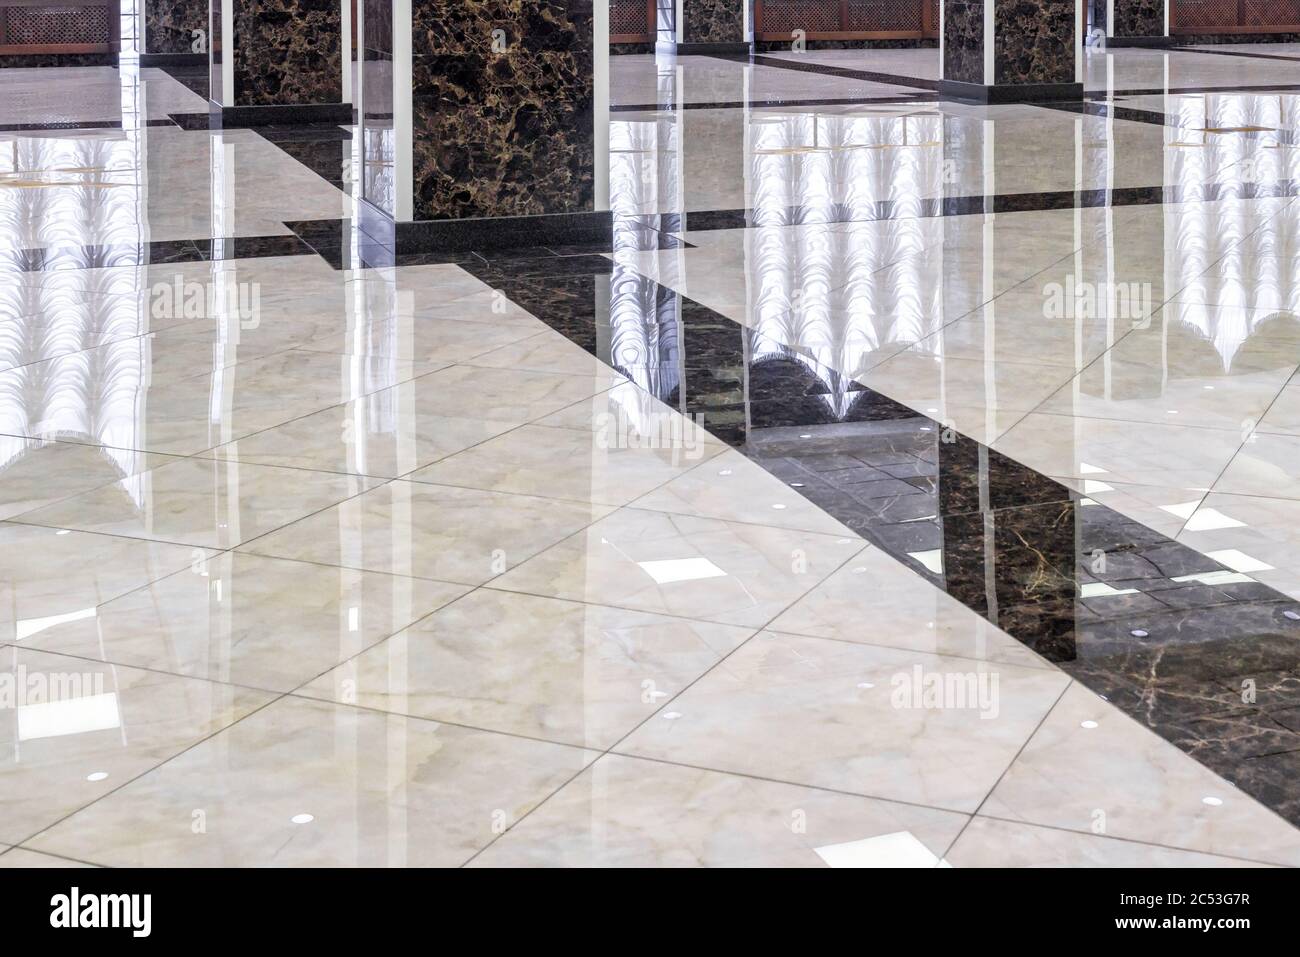 Marble floor in the luxury lobby of office or hotel. Real floor tile pattern with reflections for background. Shiny floor after professional cleaning. Stock Photo